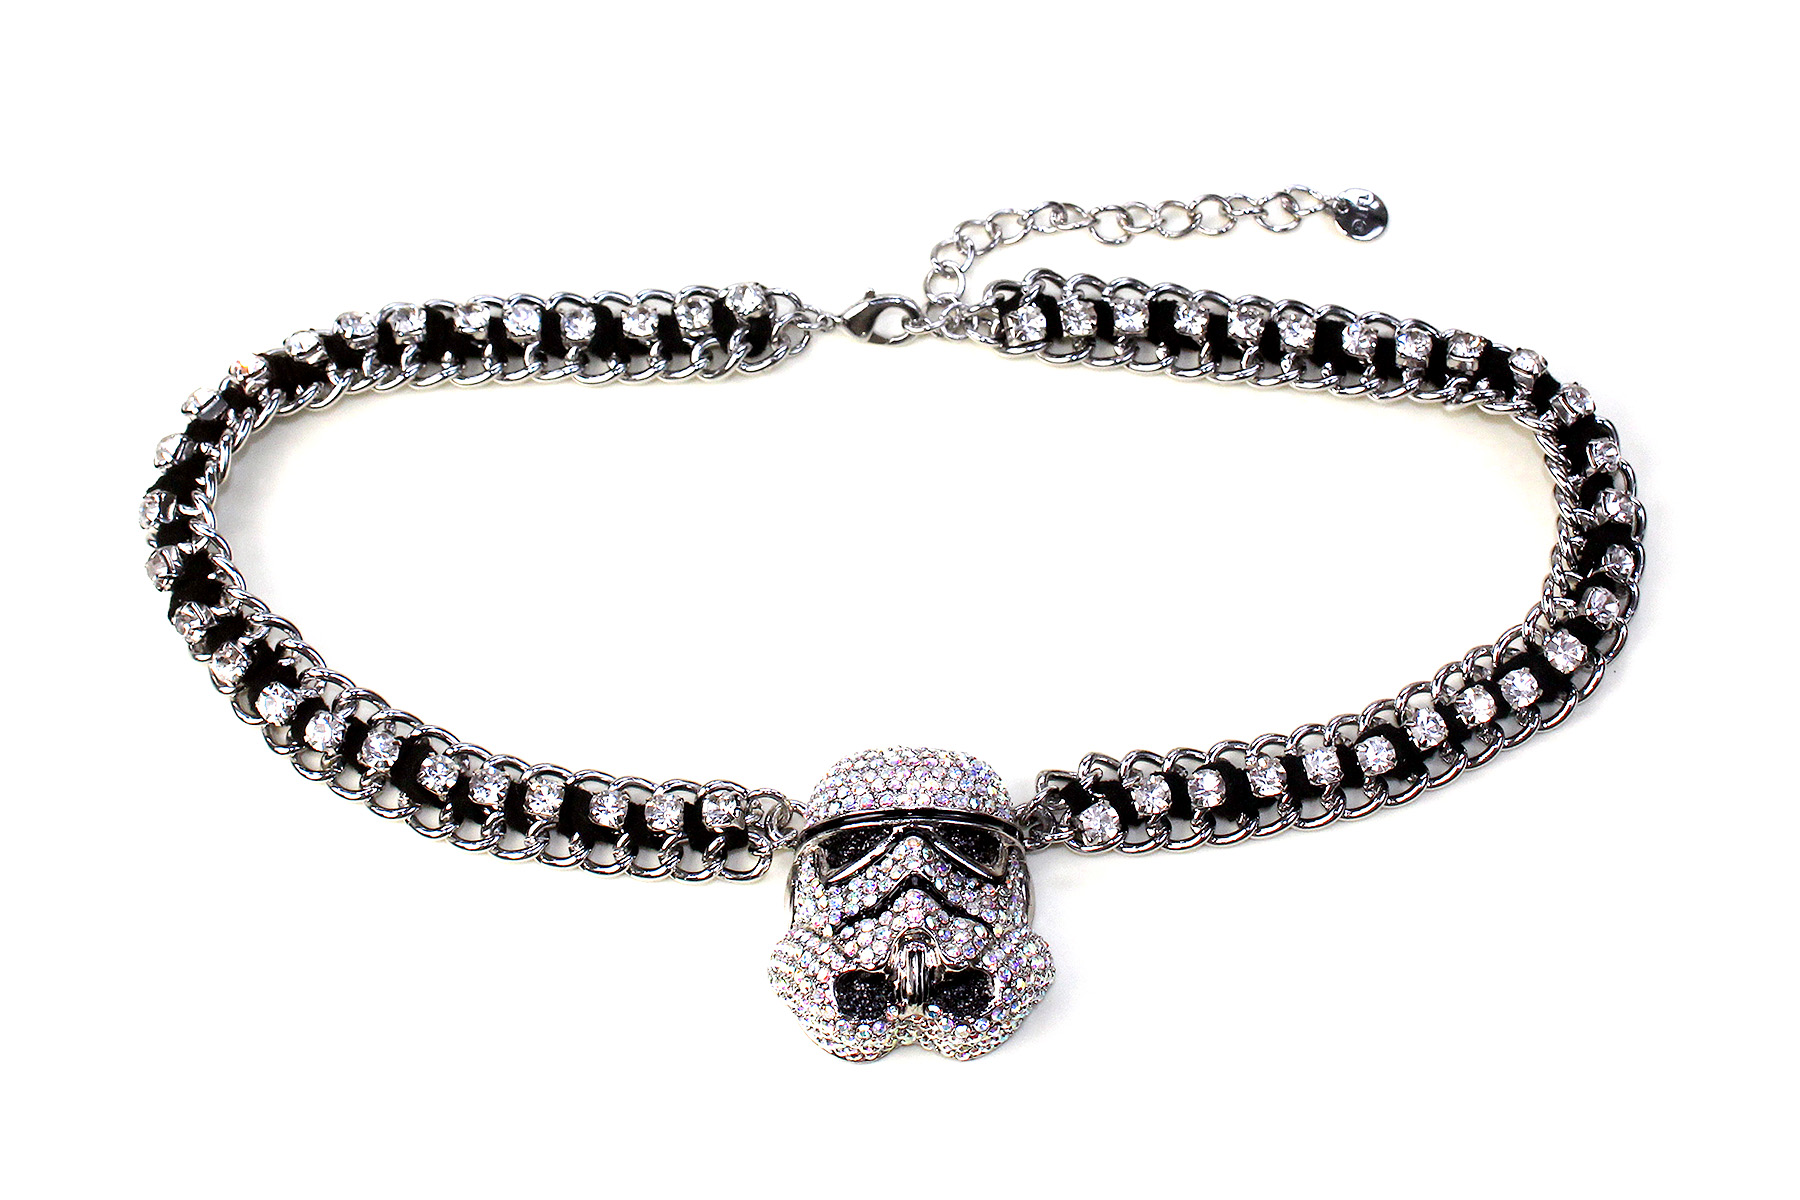 Stormtrooper pave’ silvertone velvet ribbon link necklace by SG@NYC